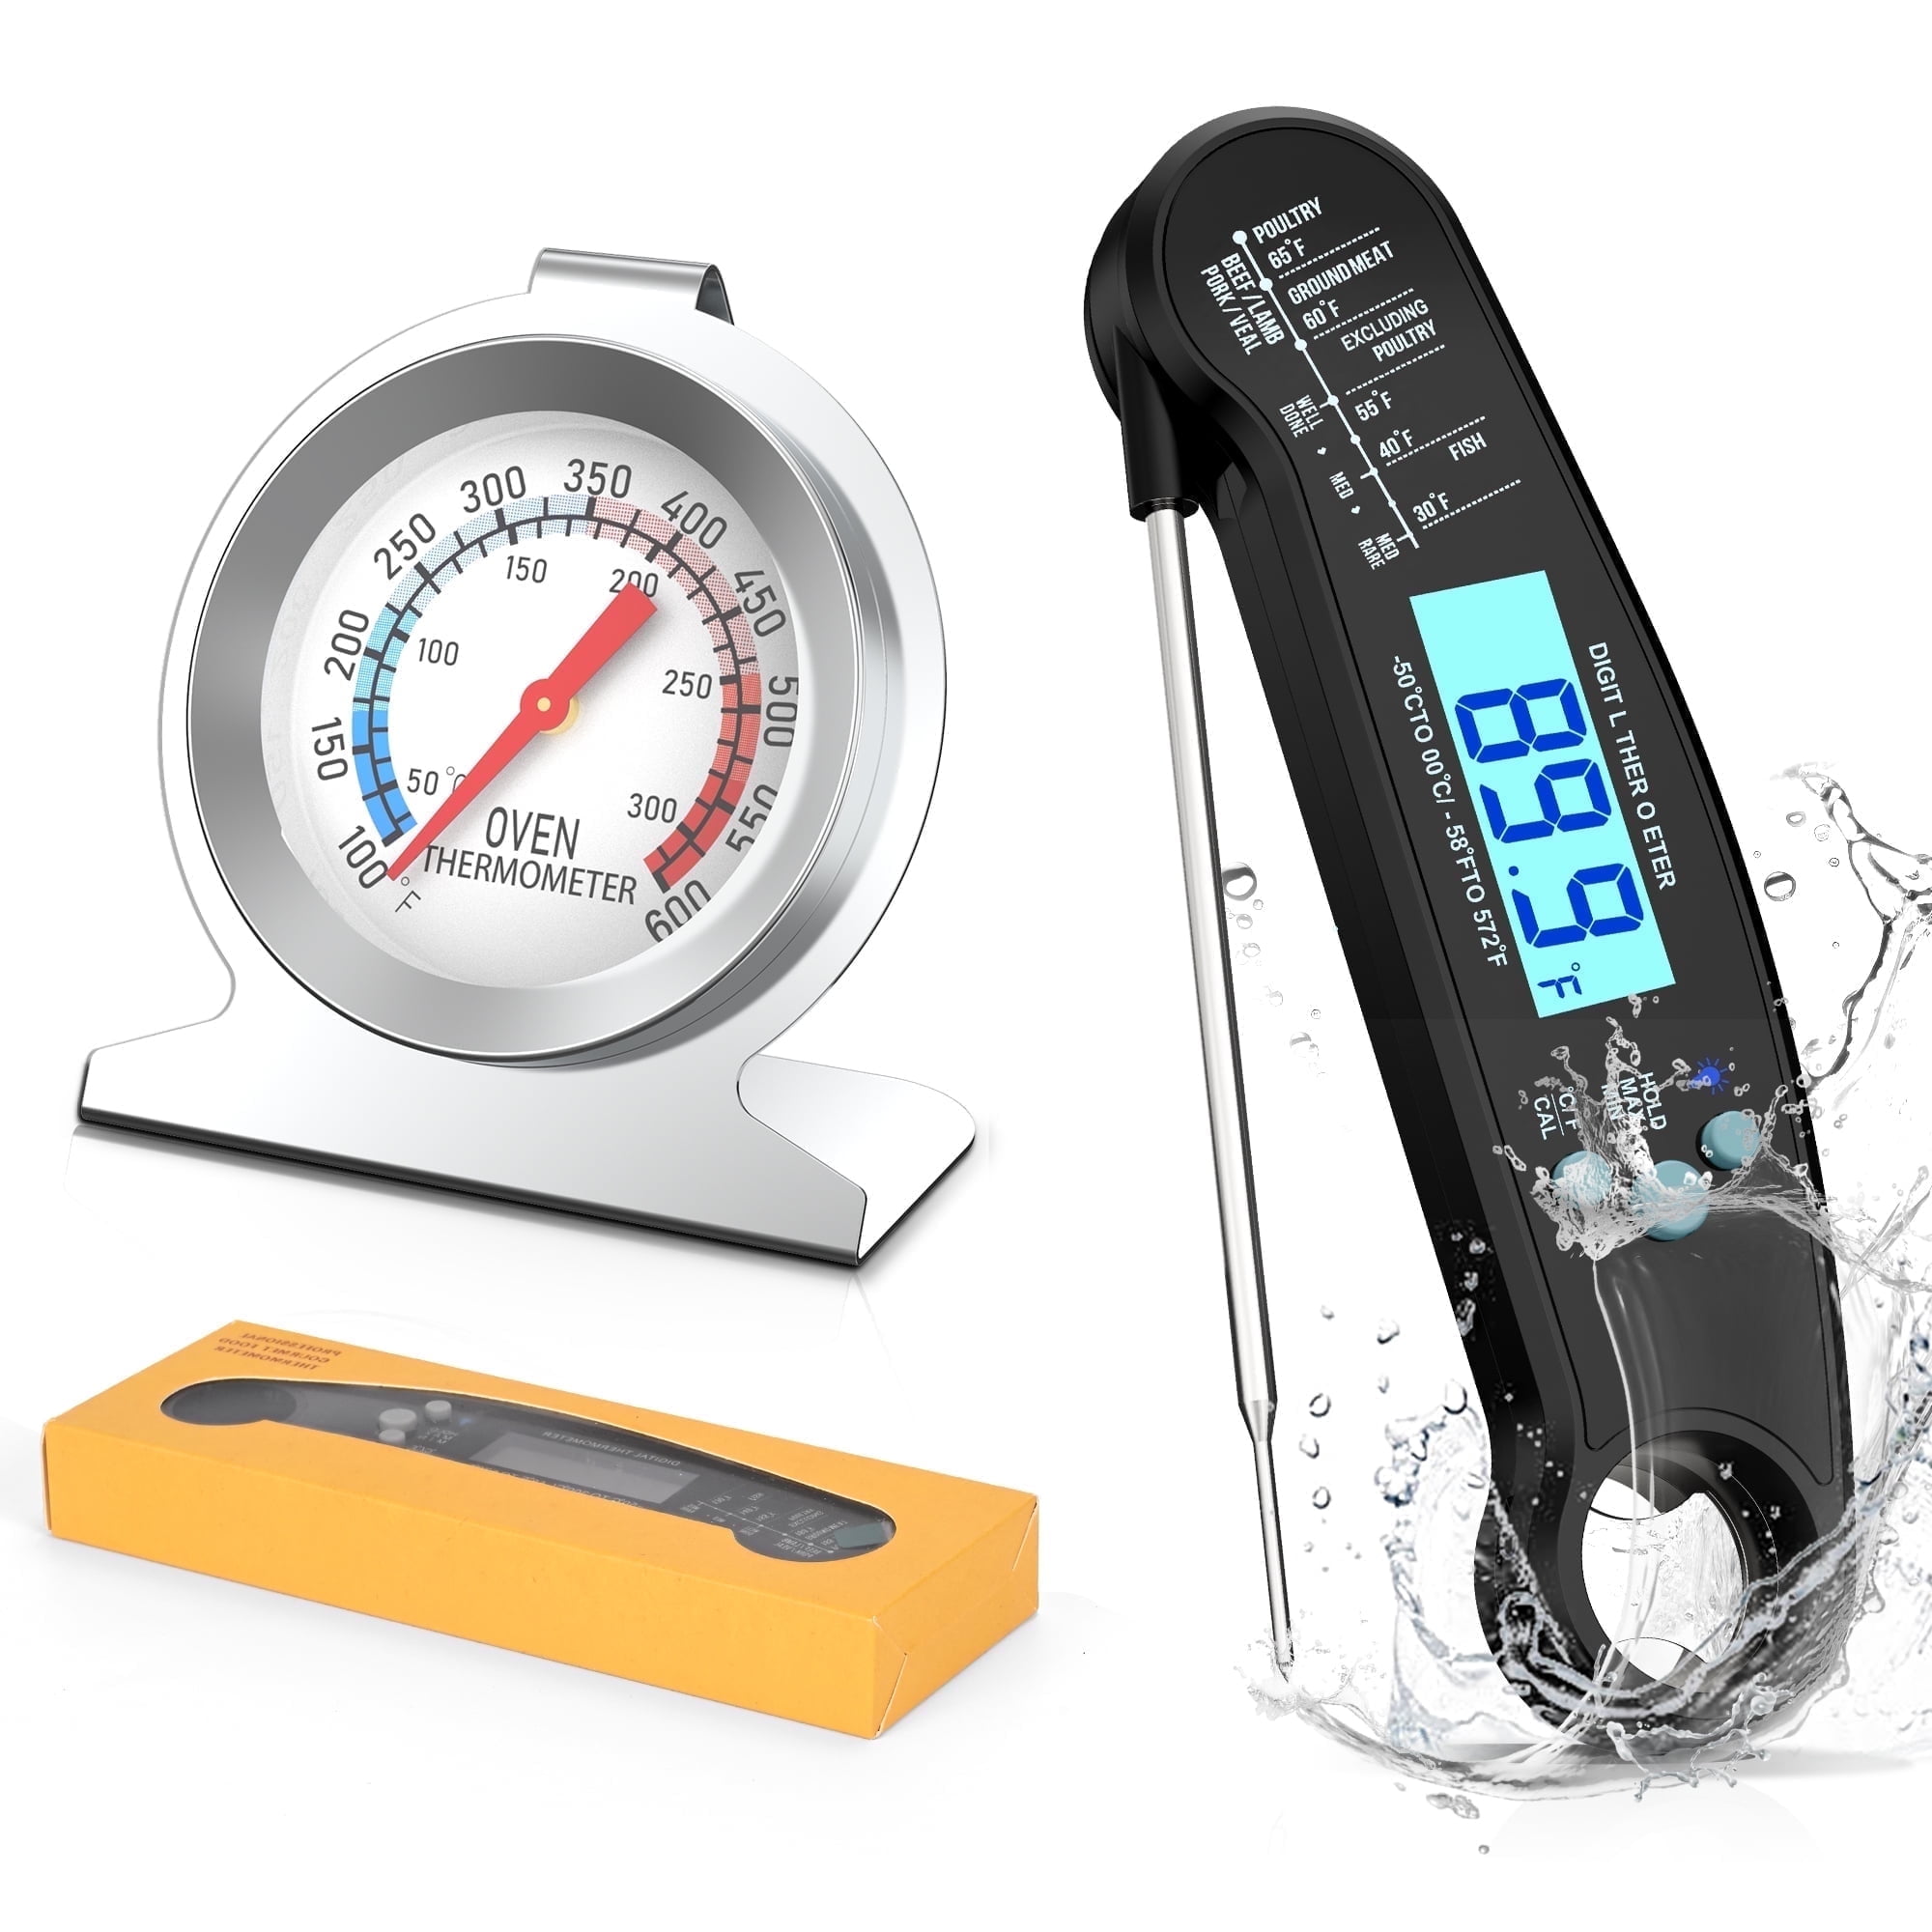 BABILL #1 Digital Meat Thermometer - BBQ Meat Thermometer - Meat Thermometer for Grilling - Meat Thermometer Oven Safe w/Bonus Gift